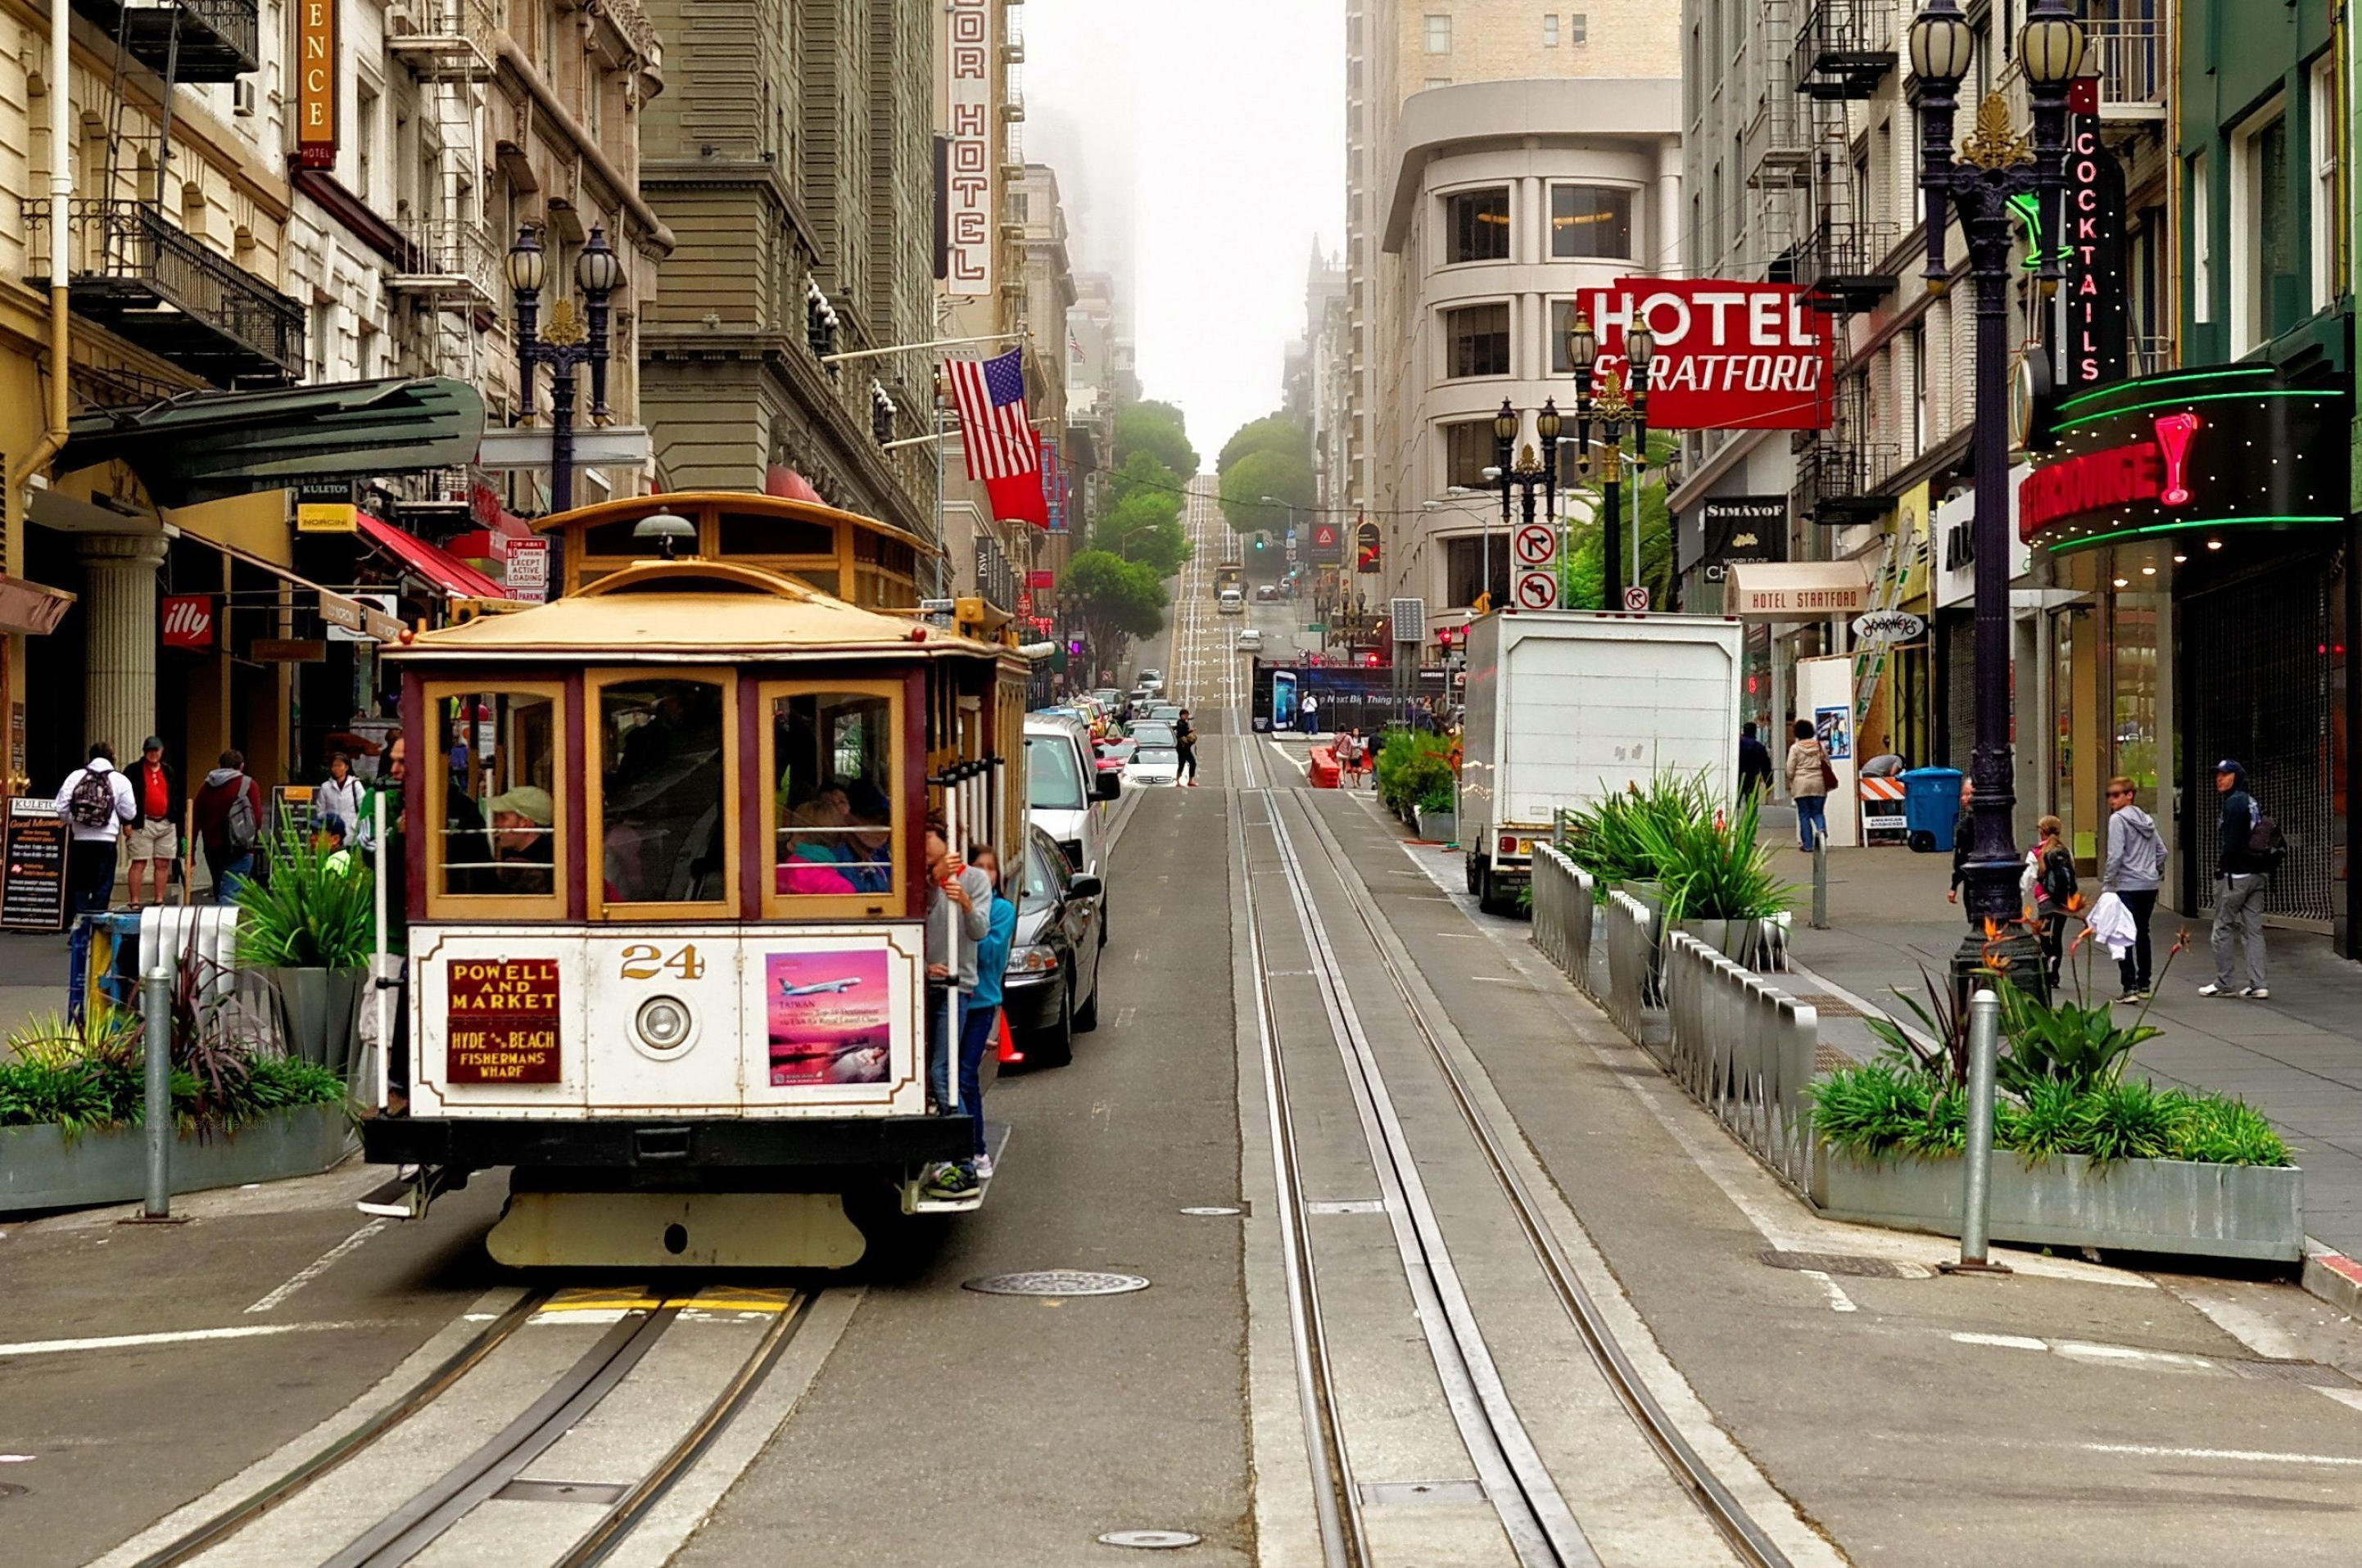 San Francisco: Cable car, Infrastructure, The world's last manually operated cable car system and an icon of the city. 2890x1920 HD Wallpaper.